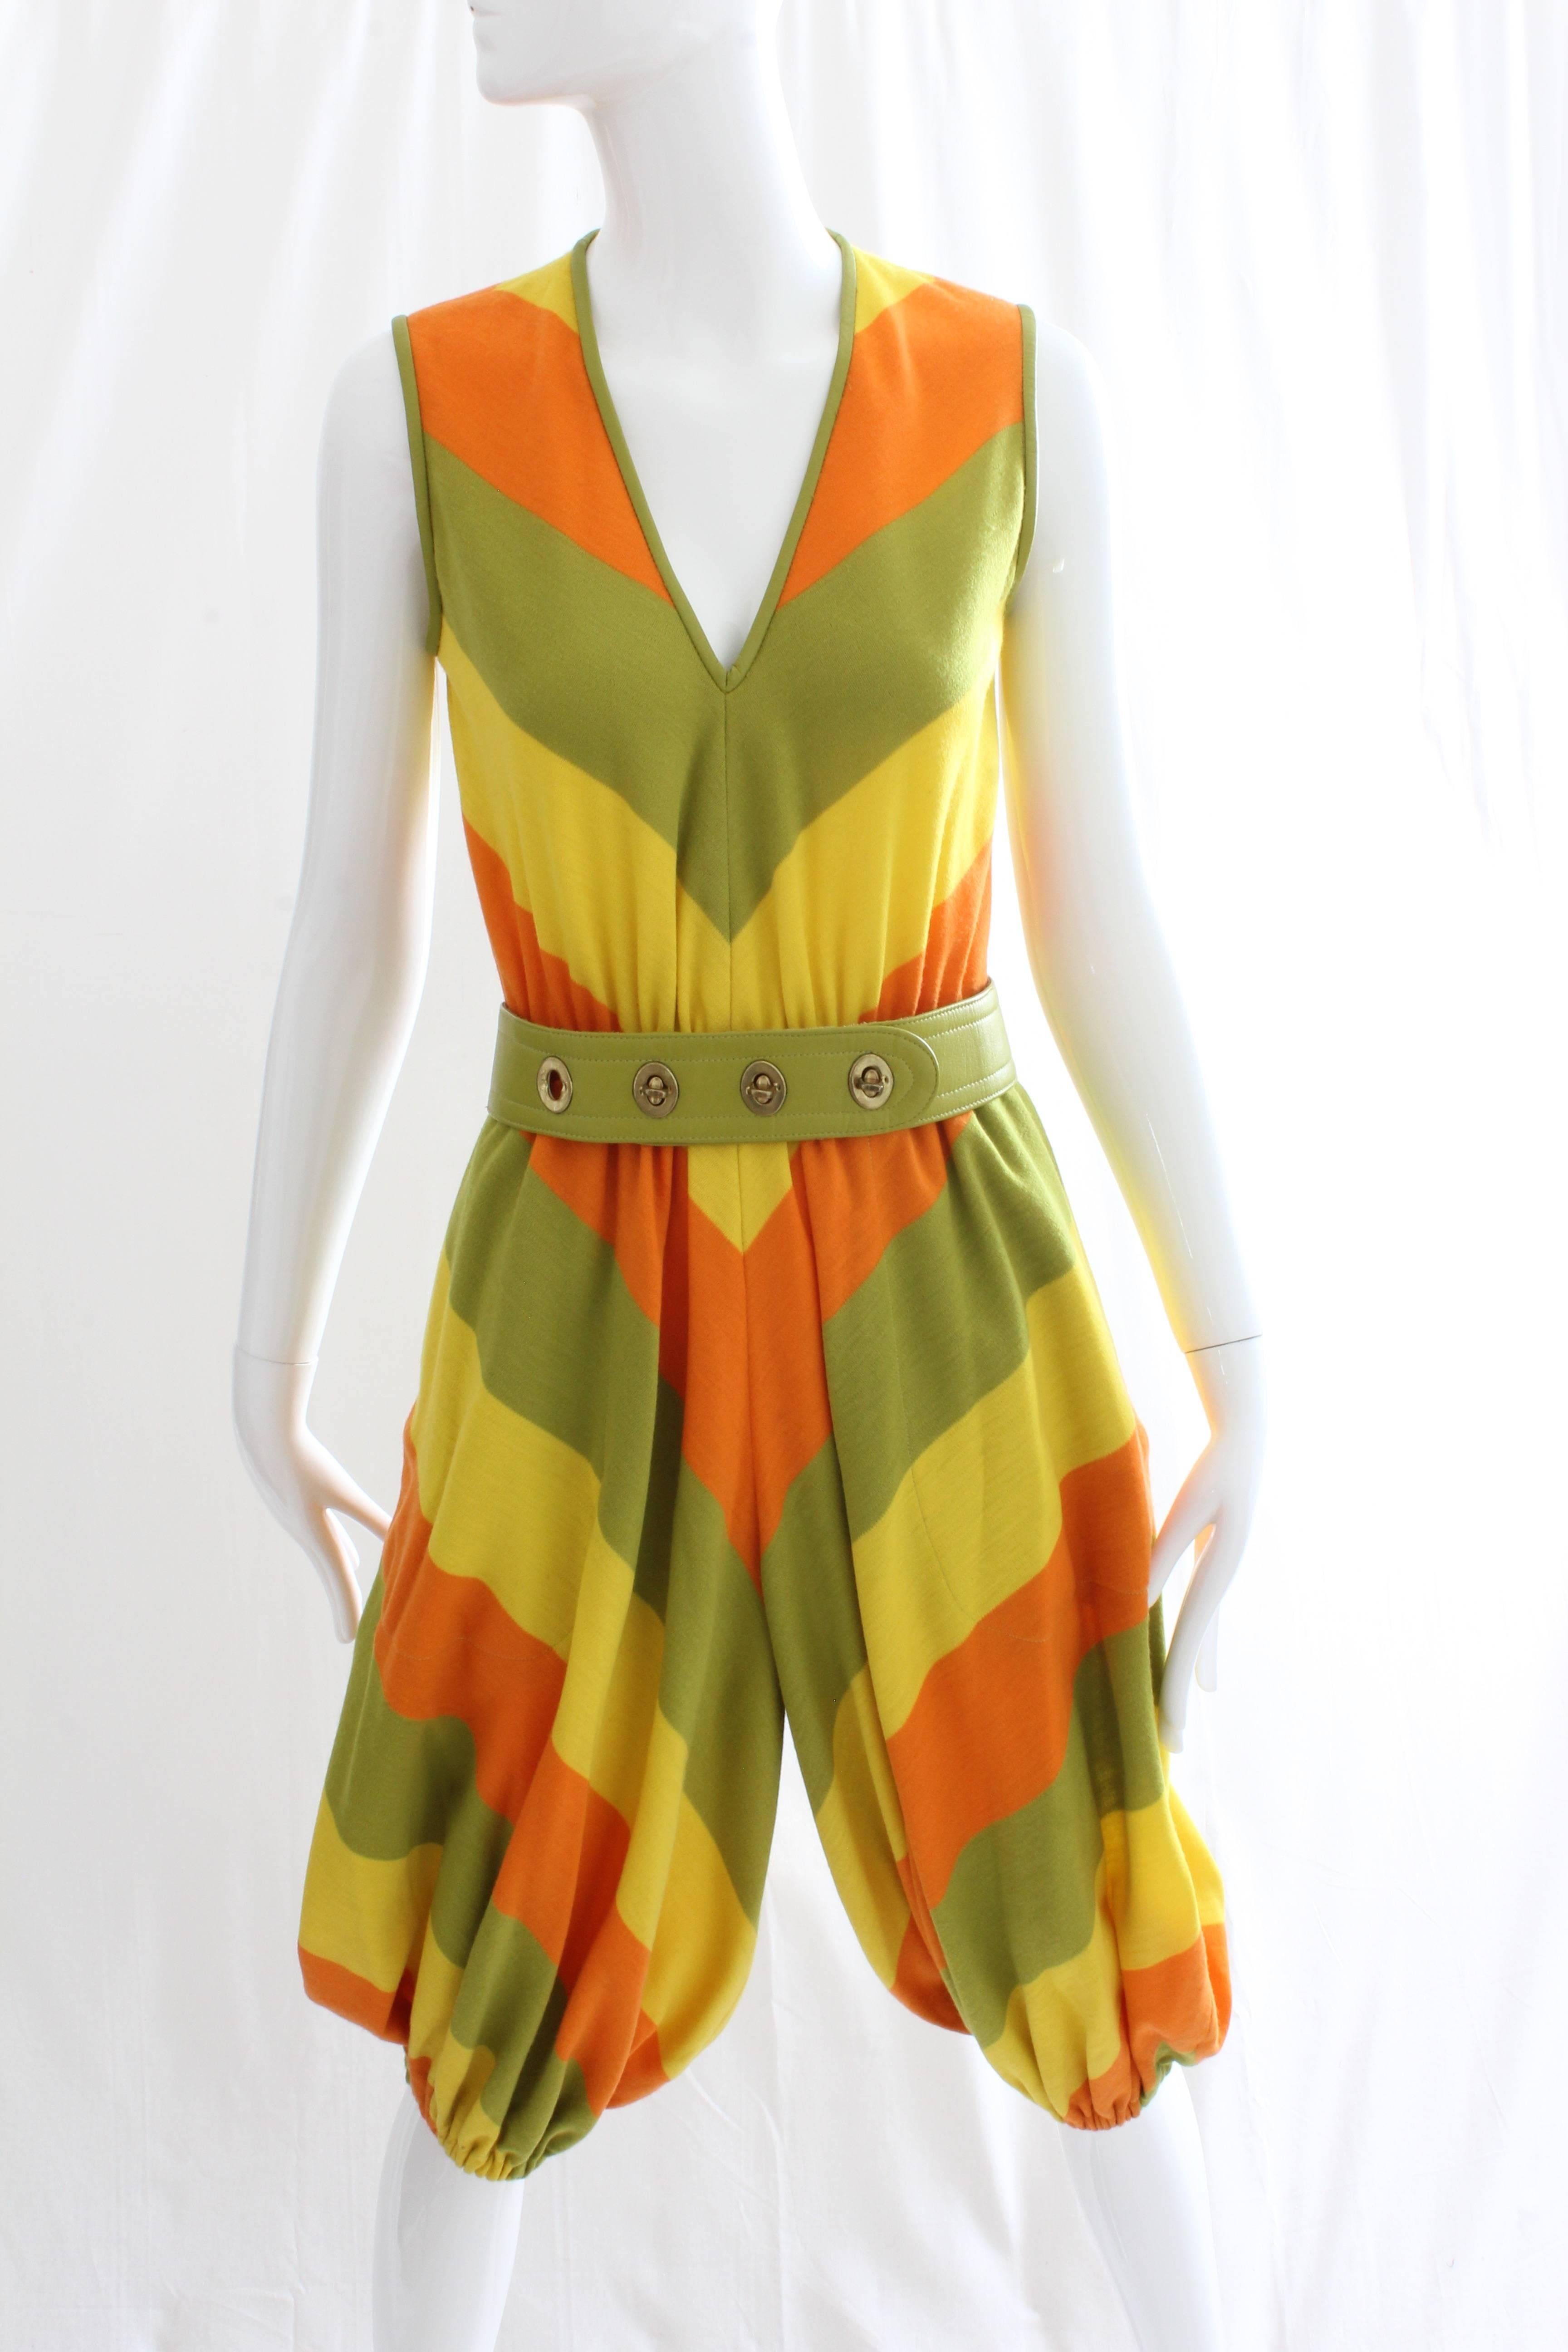 This incredibly rare jumpsuit was designed by Bonnie Cashin during her time at Sills in the 1960s. Made from a soft wool jersey fabric in bright shades of melon, lime and lemon, it features lime leather trim and comes with a matching brass turnlock